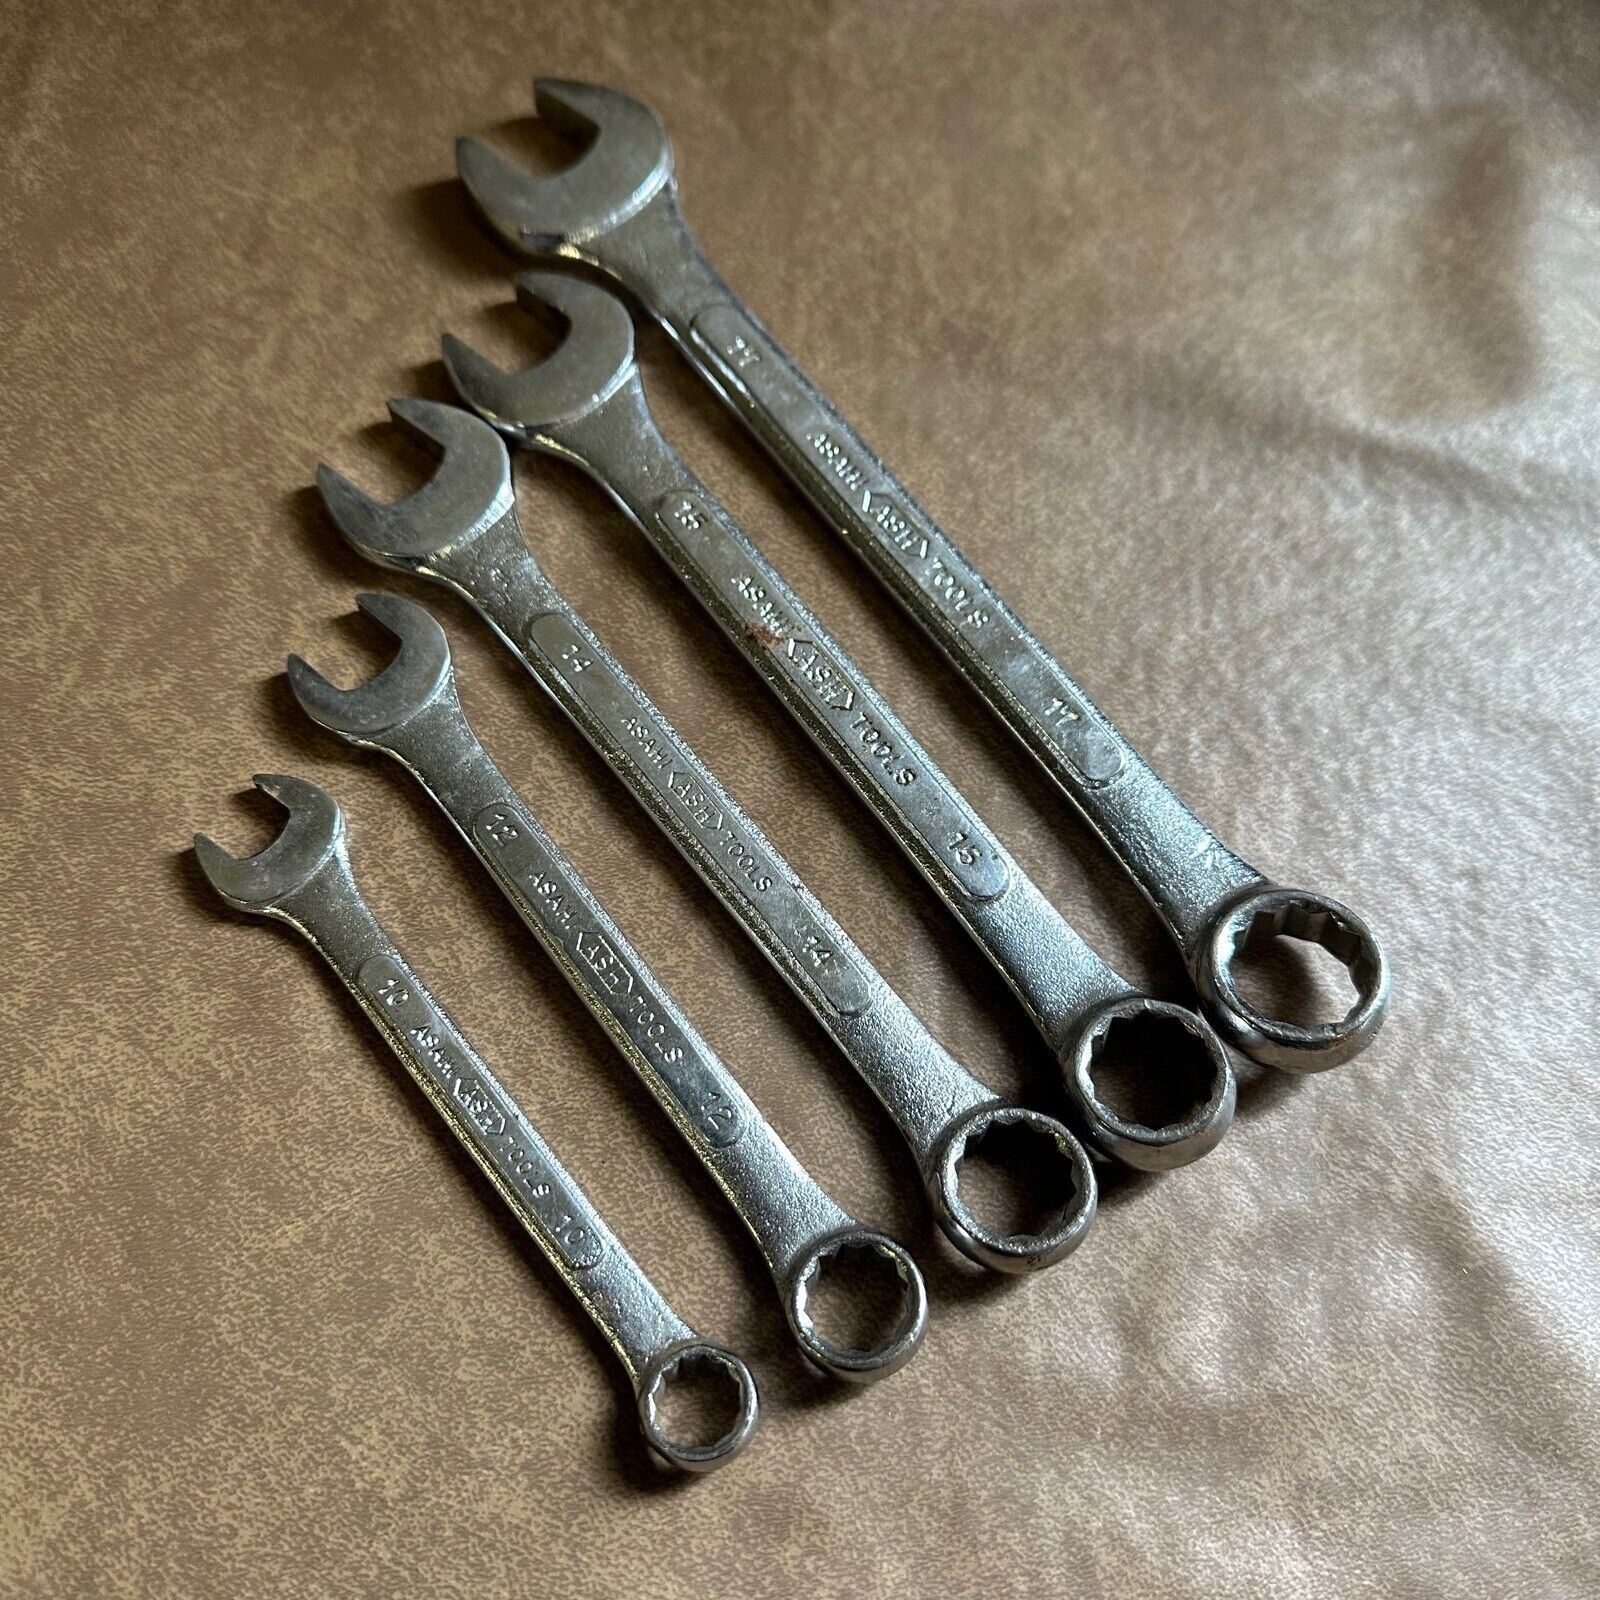 5x VINTAGE ASH ASAHI METRIC 10mm - 17mm COMBINATION RING SPANNERS MADE IN JAPAN